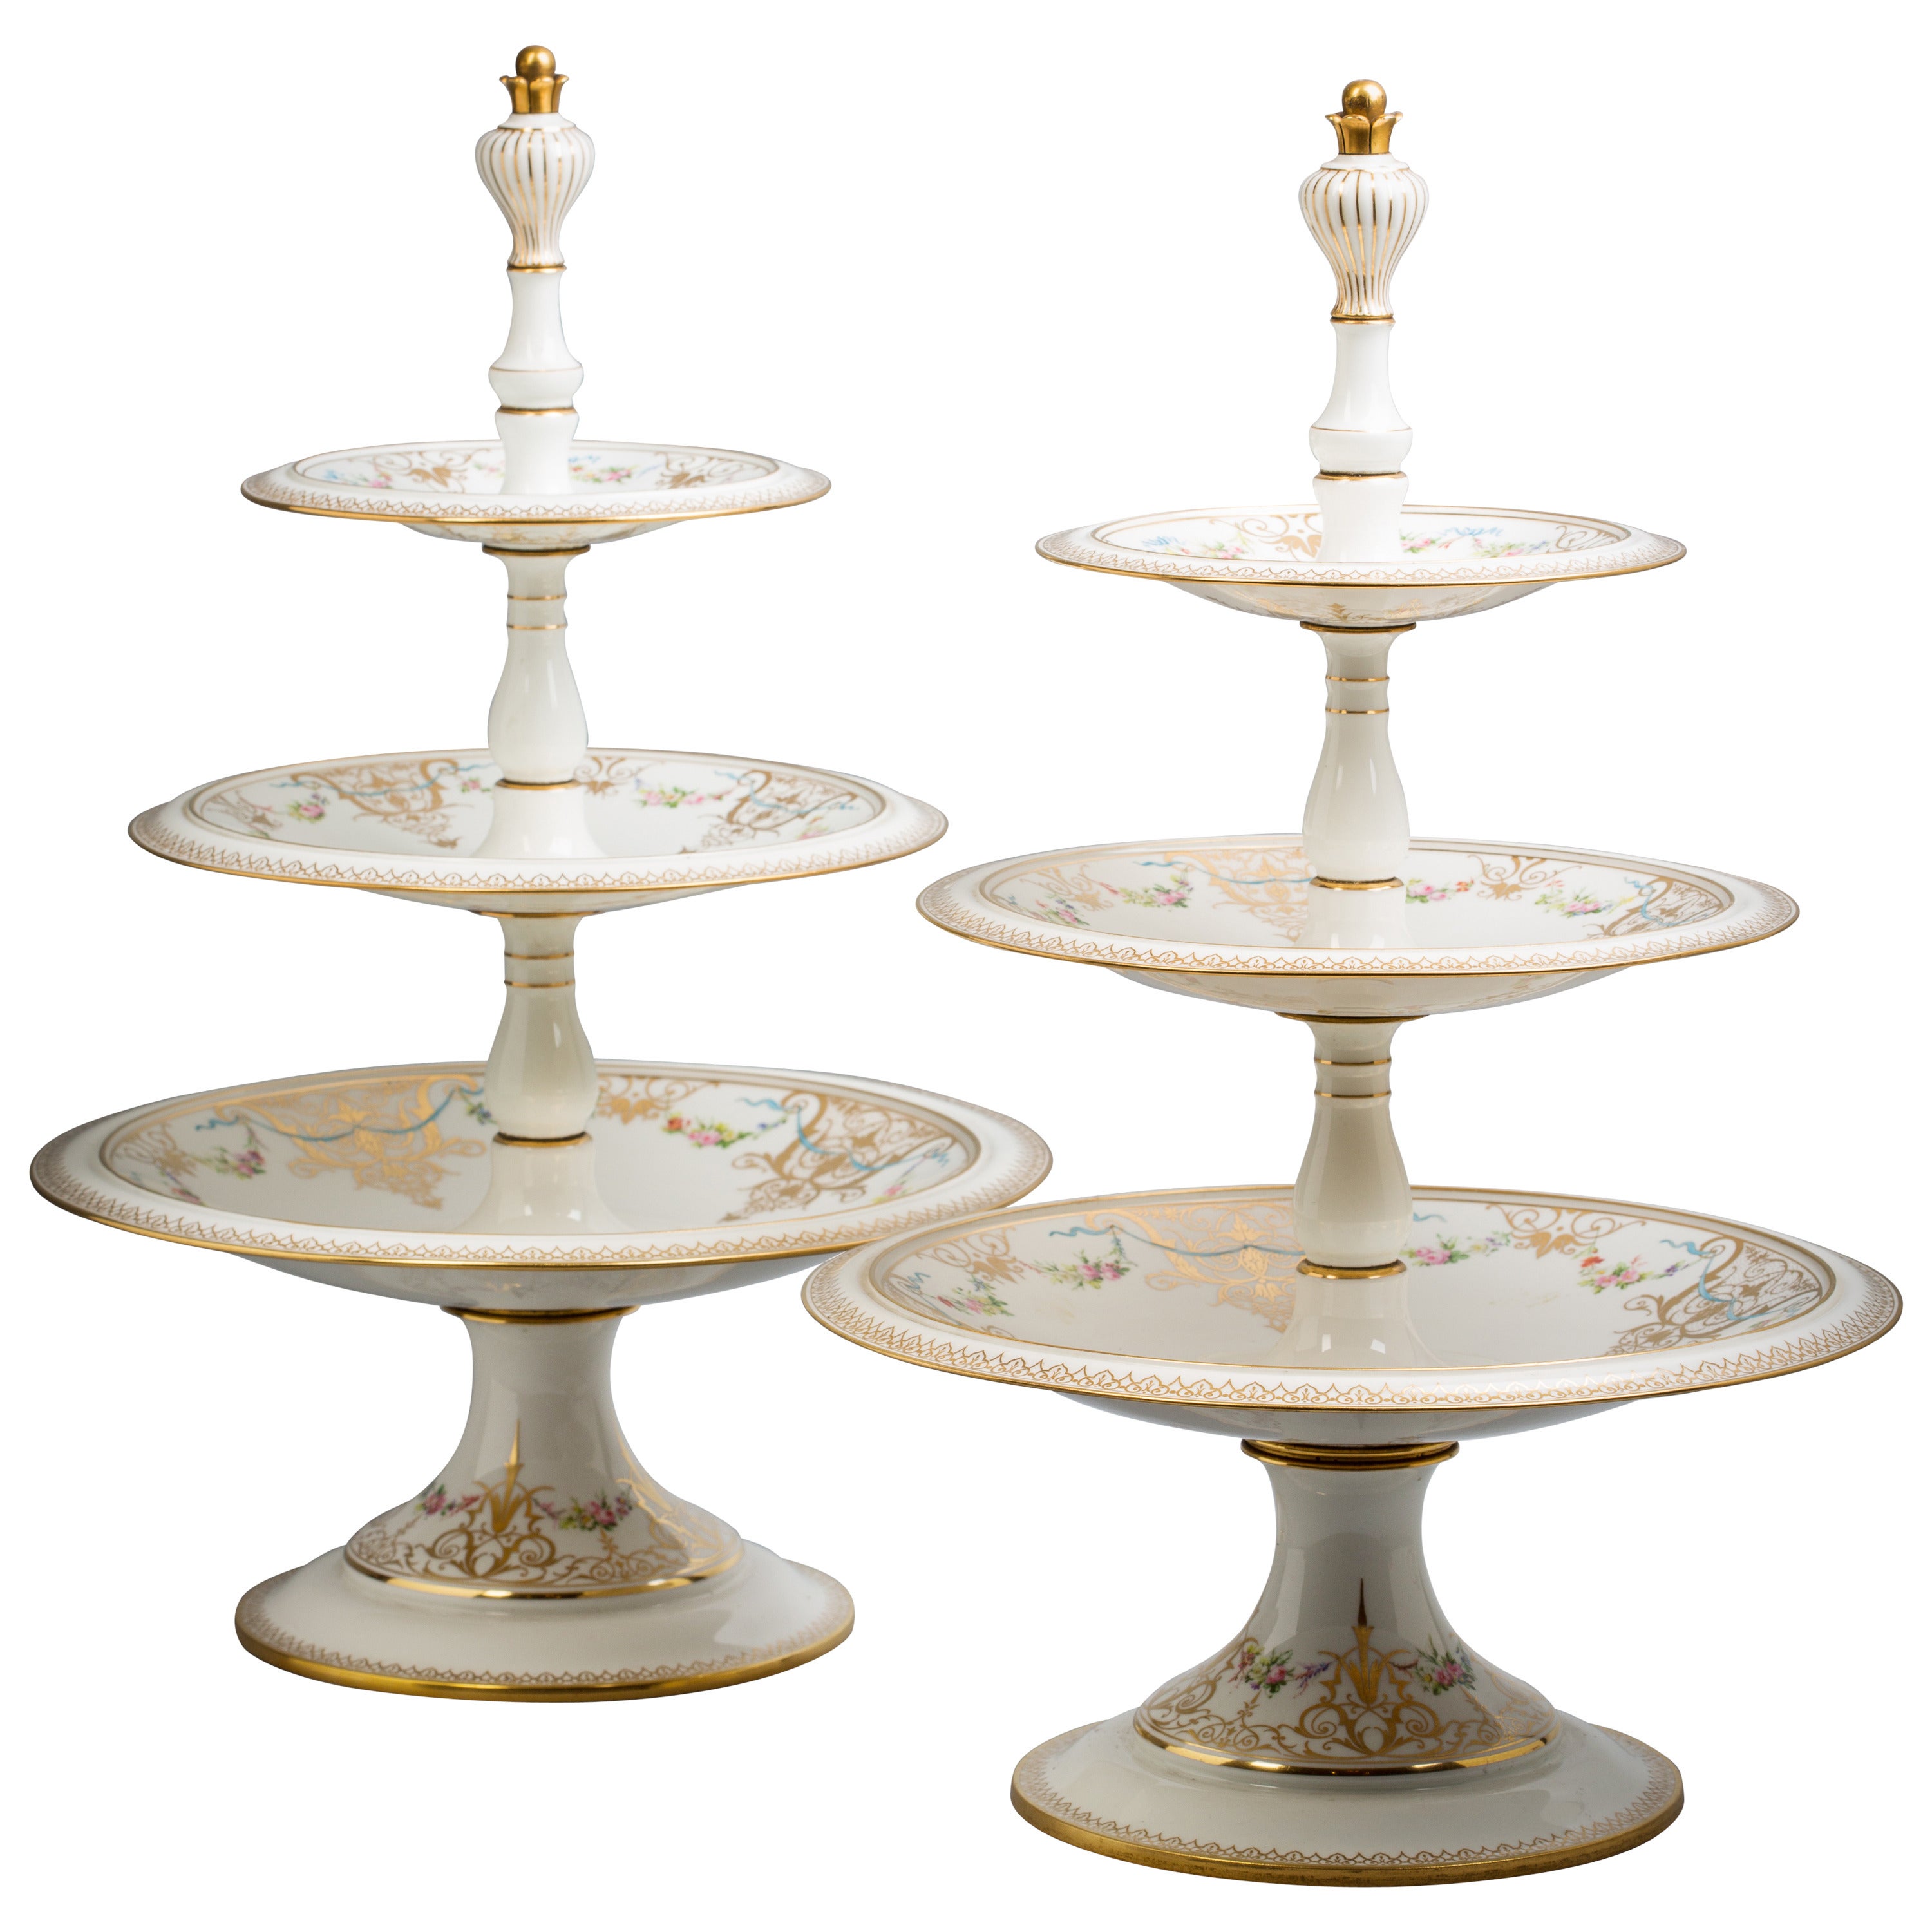 Pair of French Sèvres Porcelain Three-Tier Compote, circa 1851